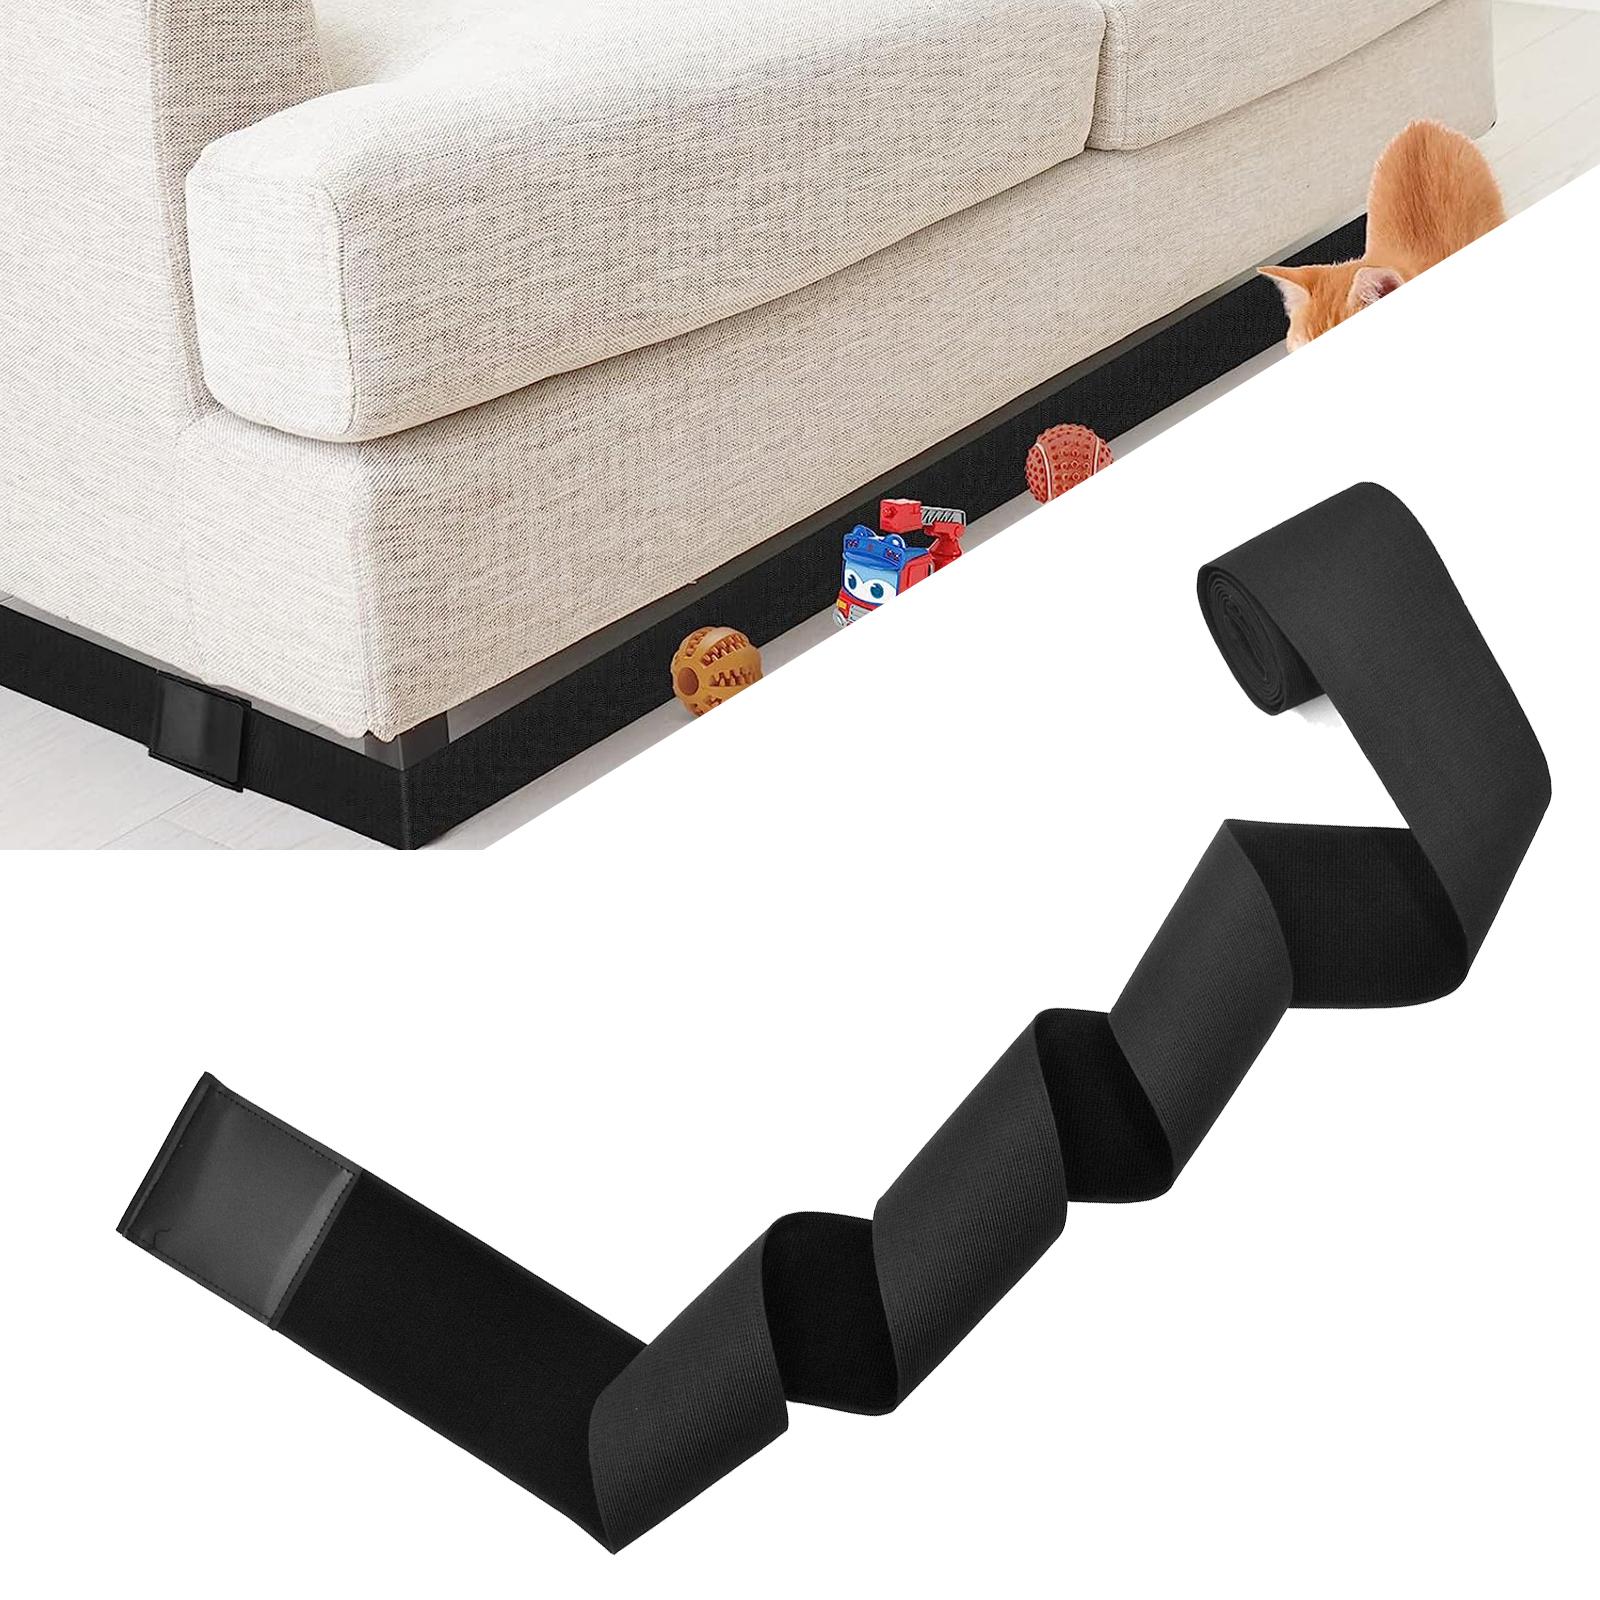 Under Couch Blocker for Toys Easy to Install Toy Blockers for Under Sofa Bed 10cmx2.8meters